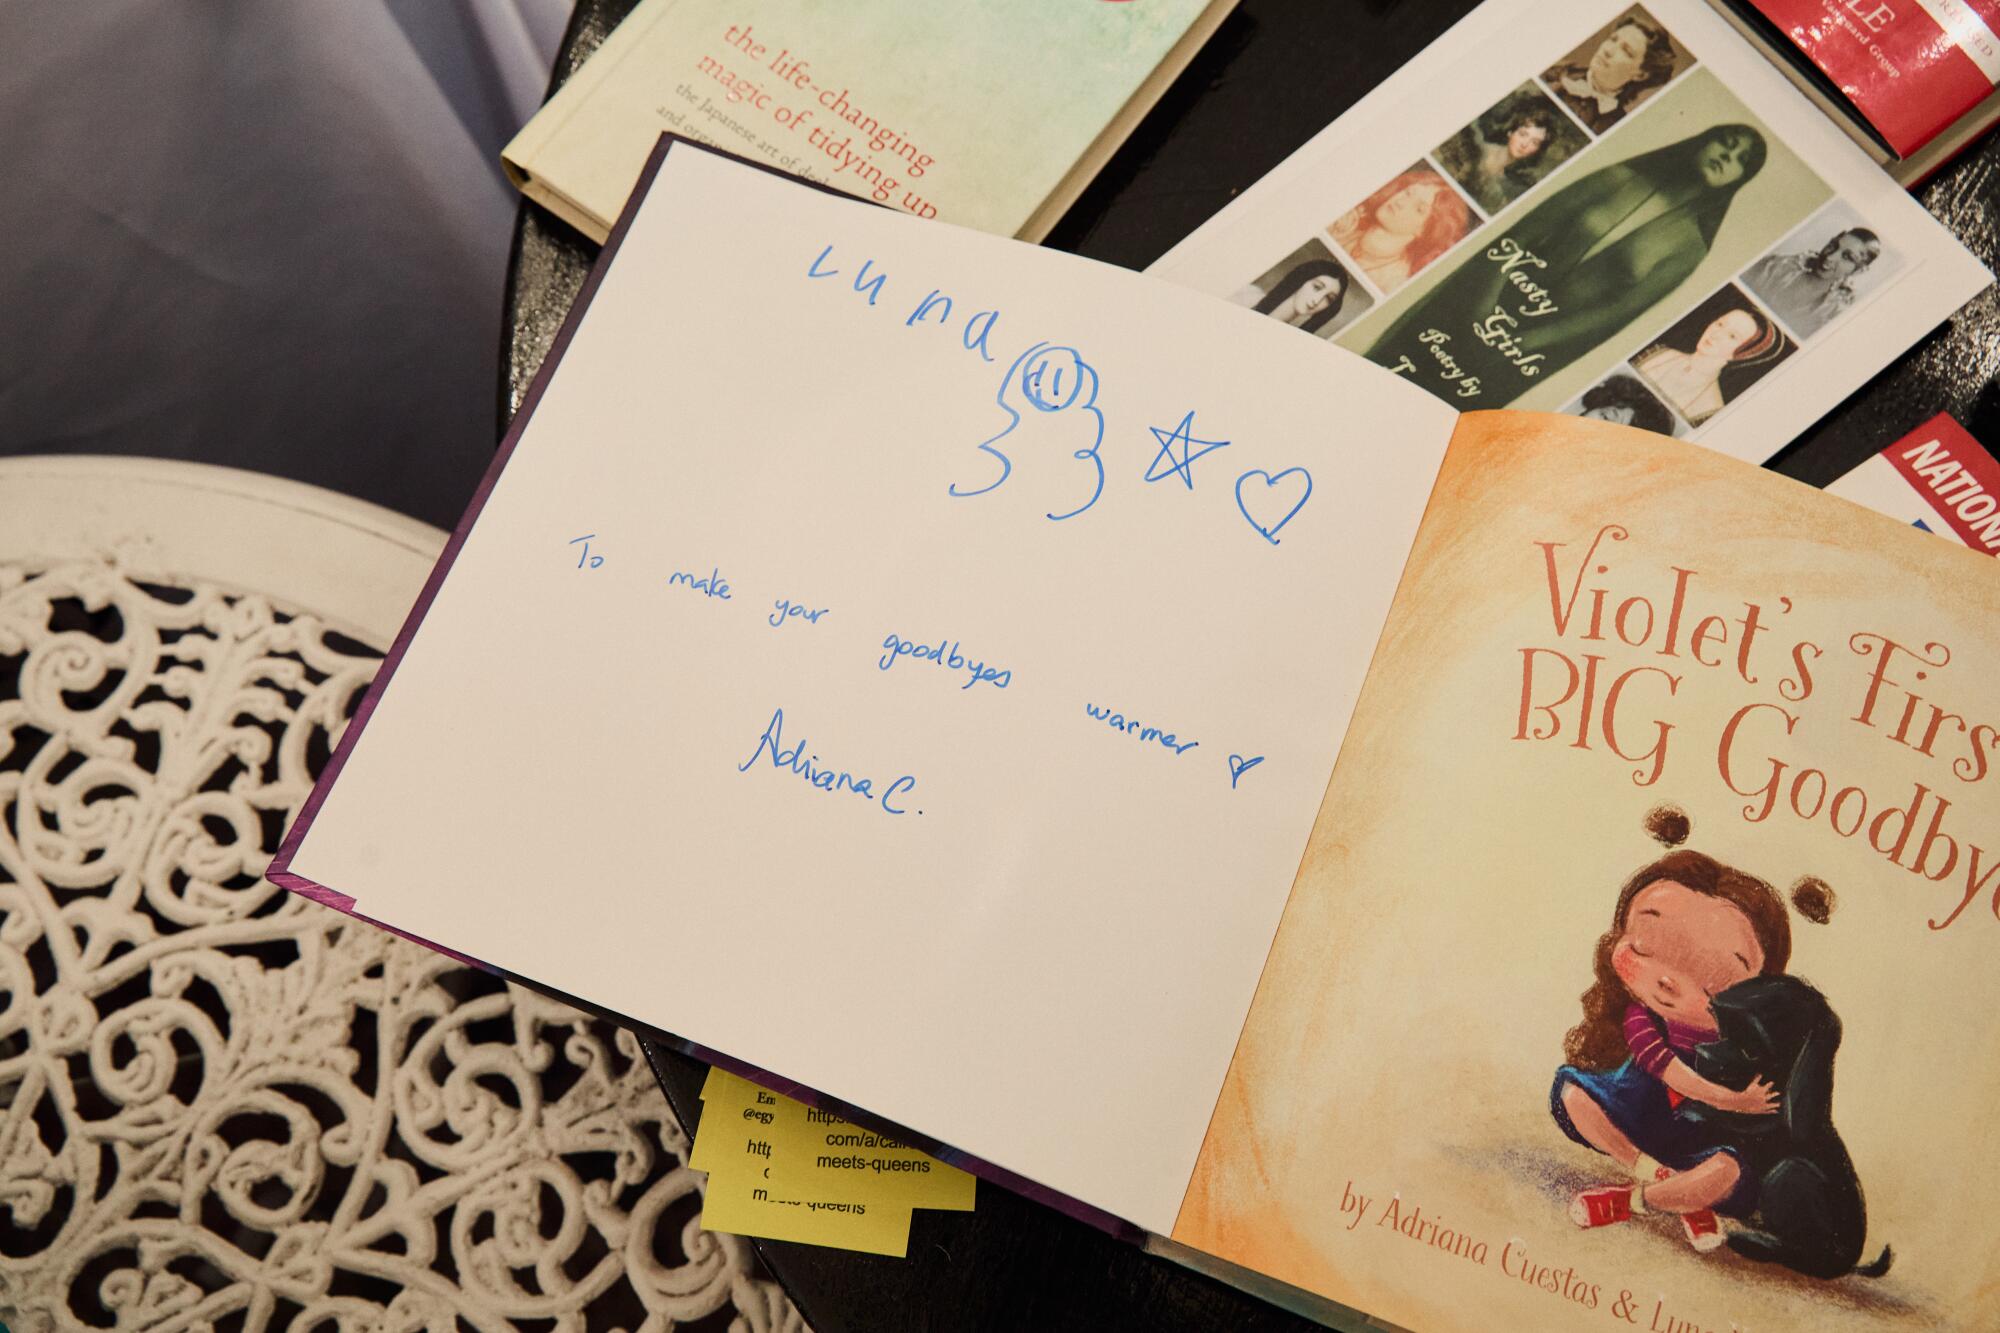 A signed copy of "Violet's First Big Goodbye" by Luna Yanez-Cuestas lies on a table at the Libros bookshop.